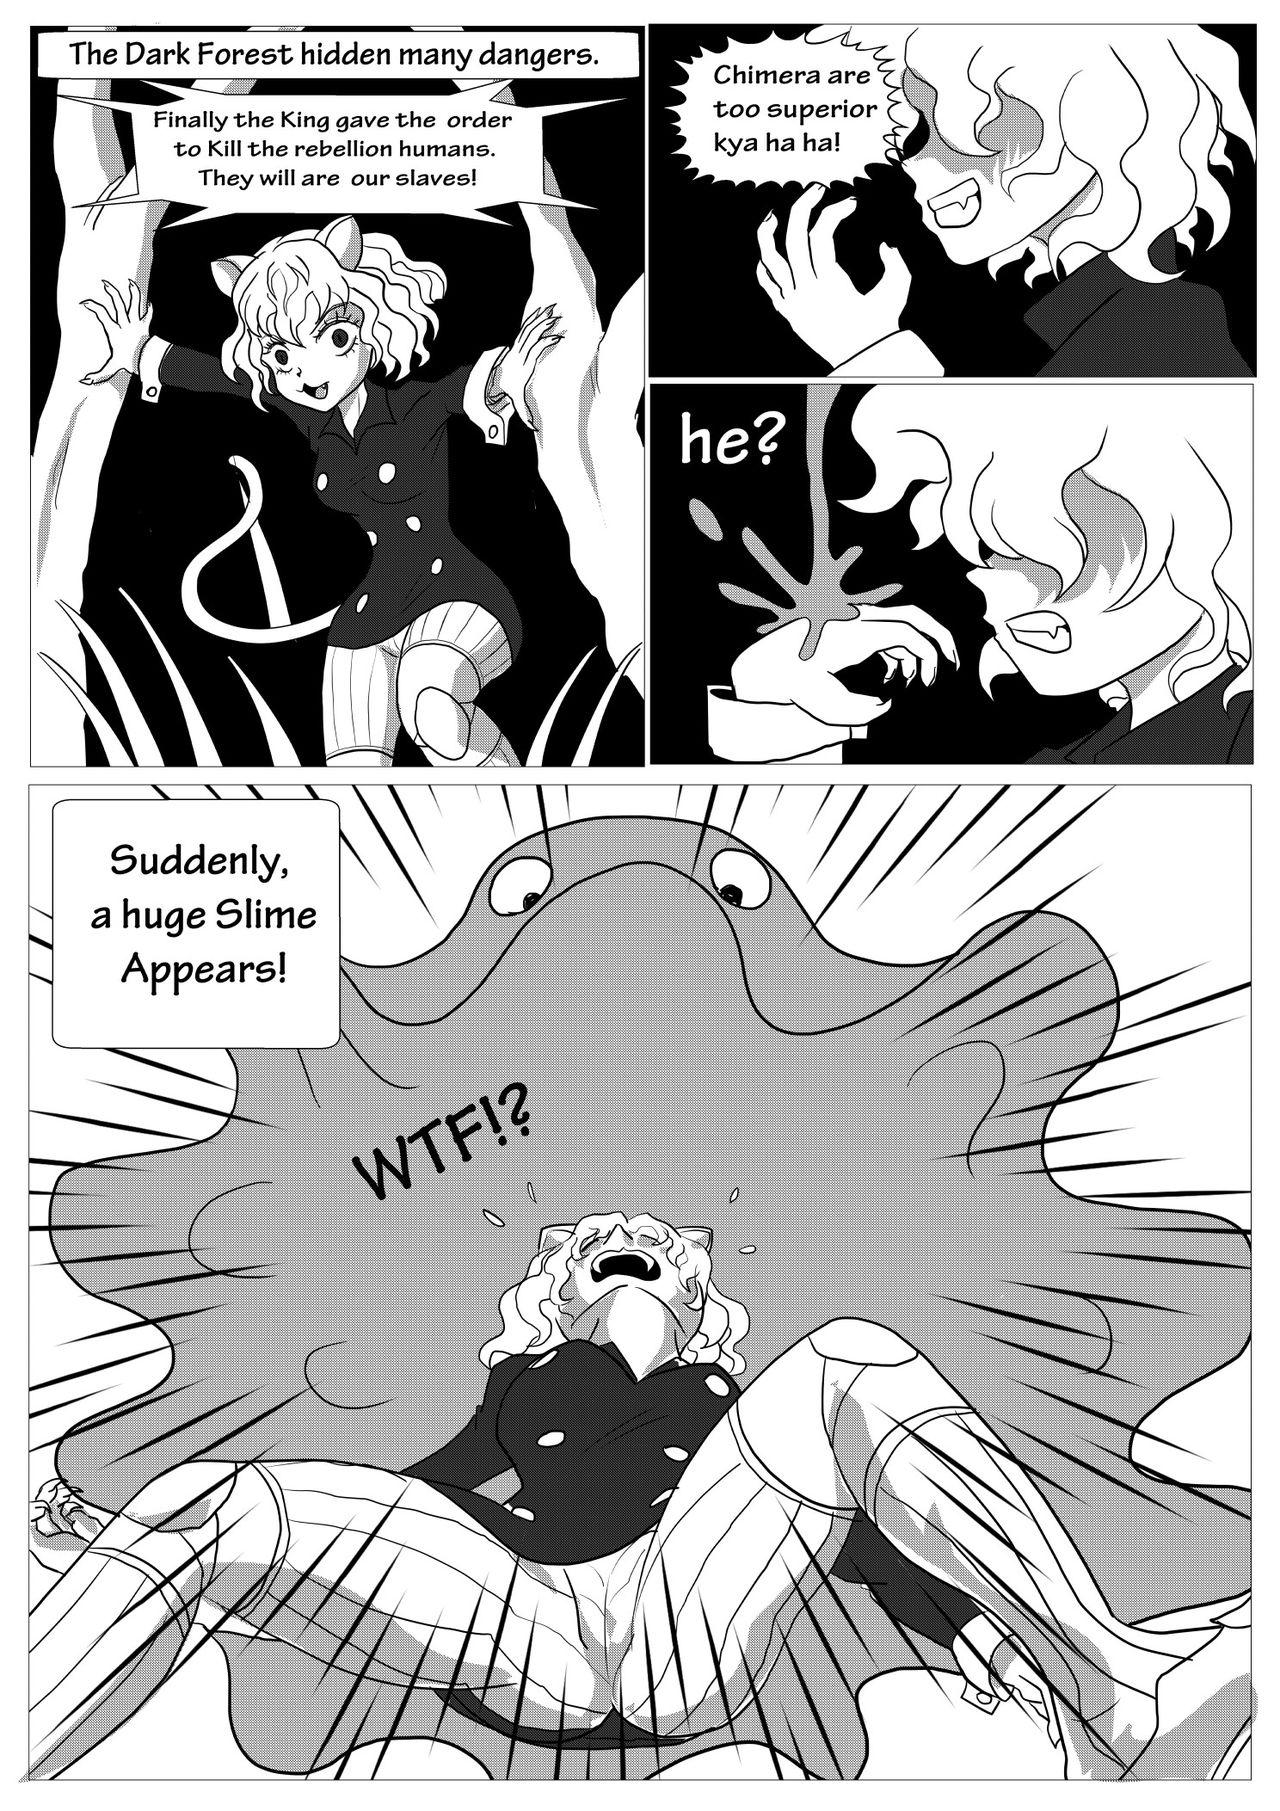 The decay of Neferpitou 1